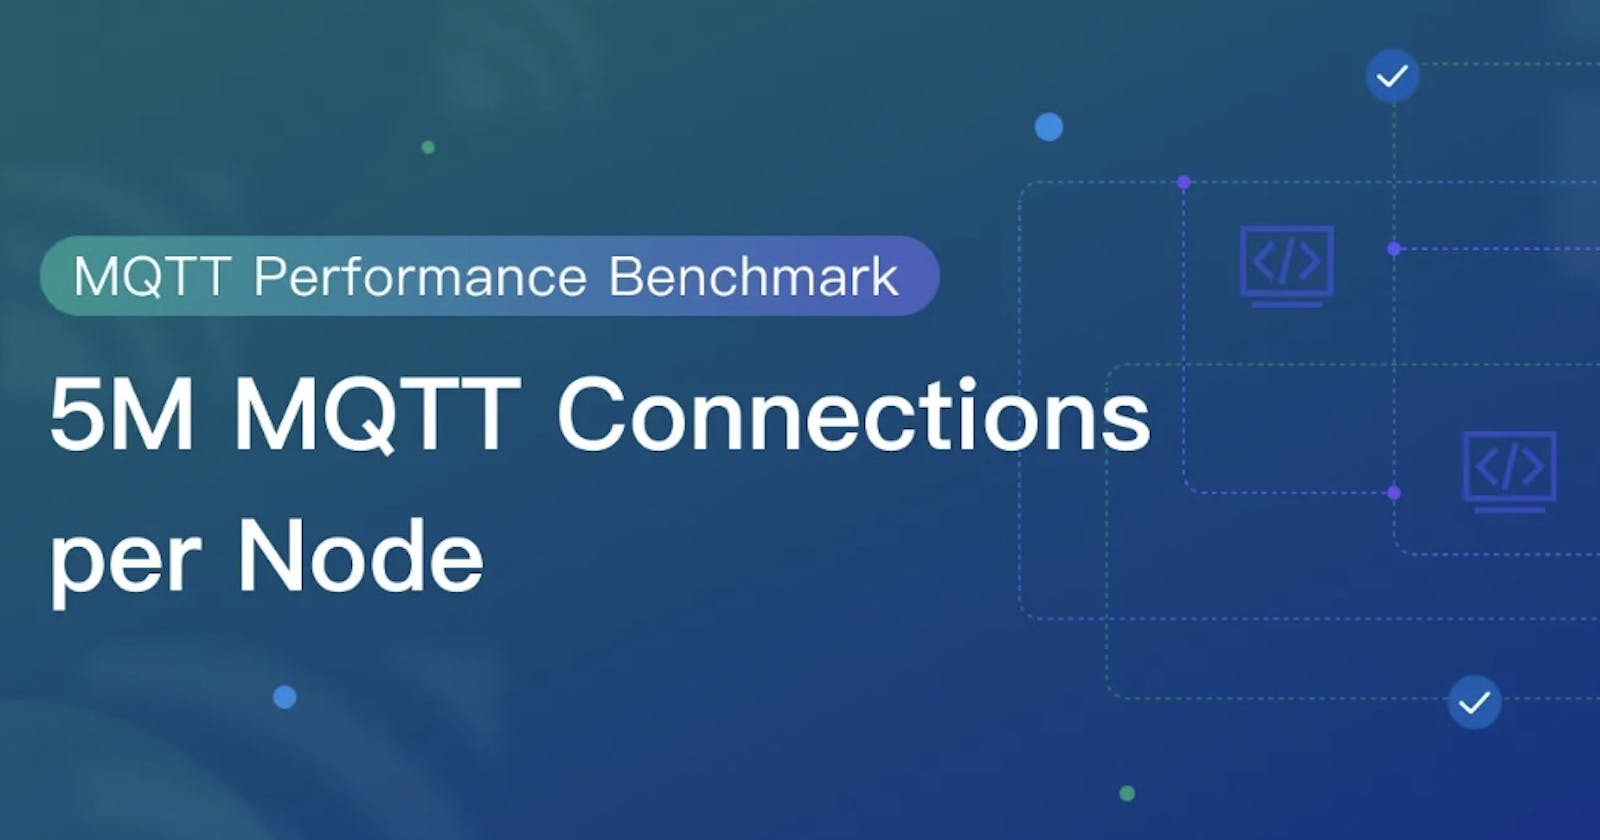 MQTT Performance Benchmark Testing: EMQX Single Node Supports 5M Connections